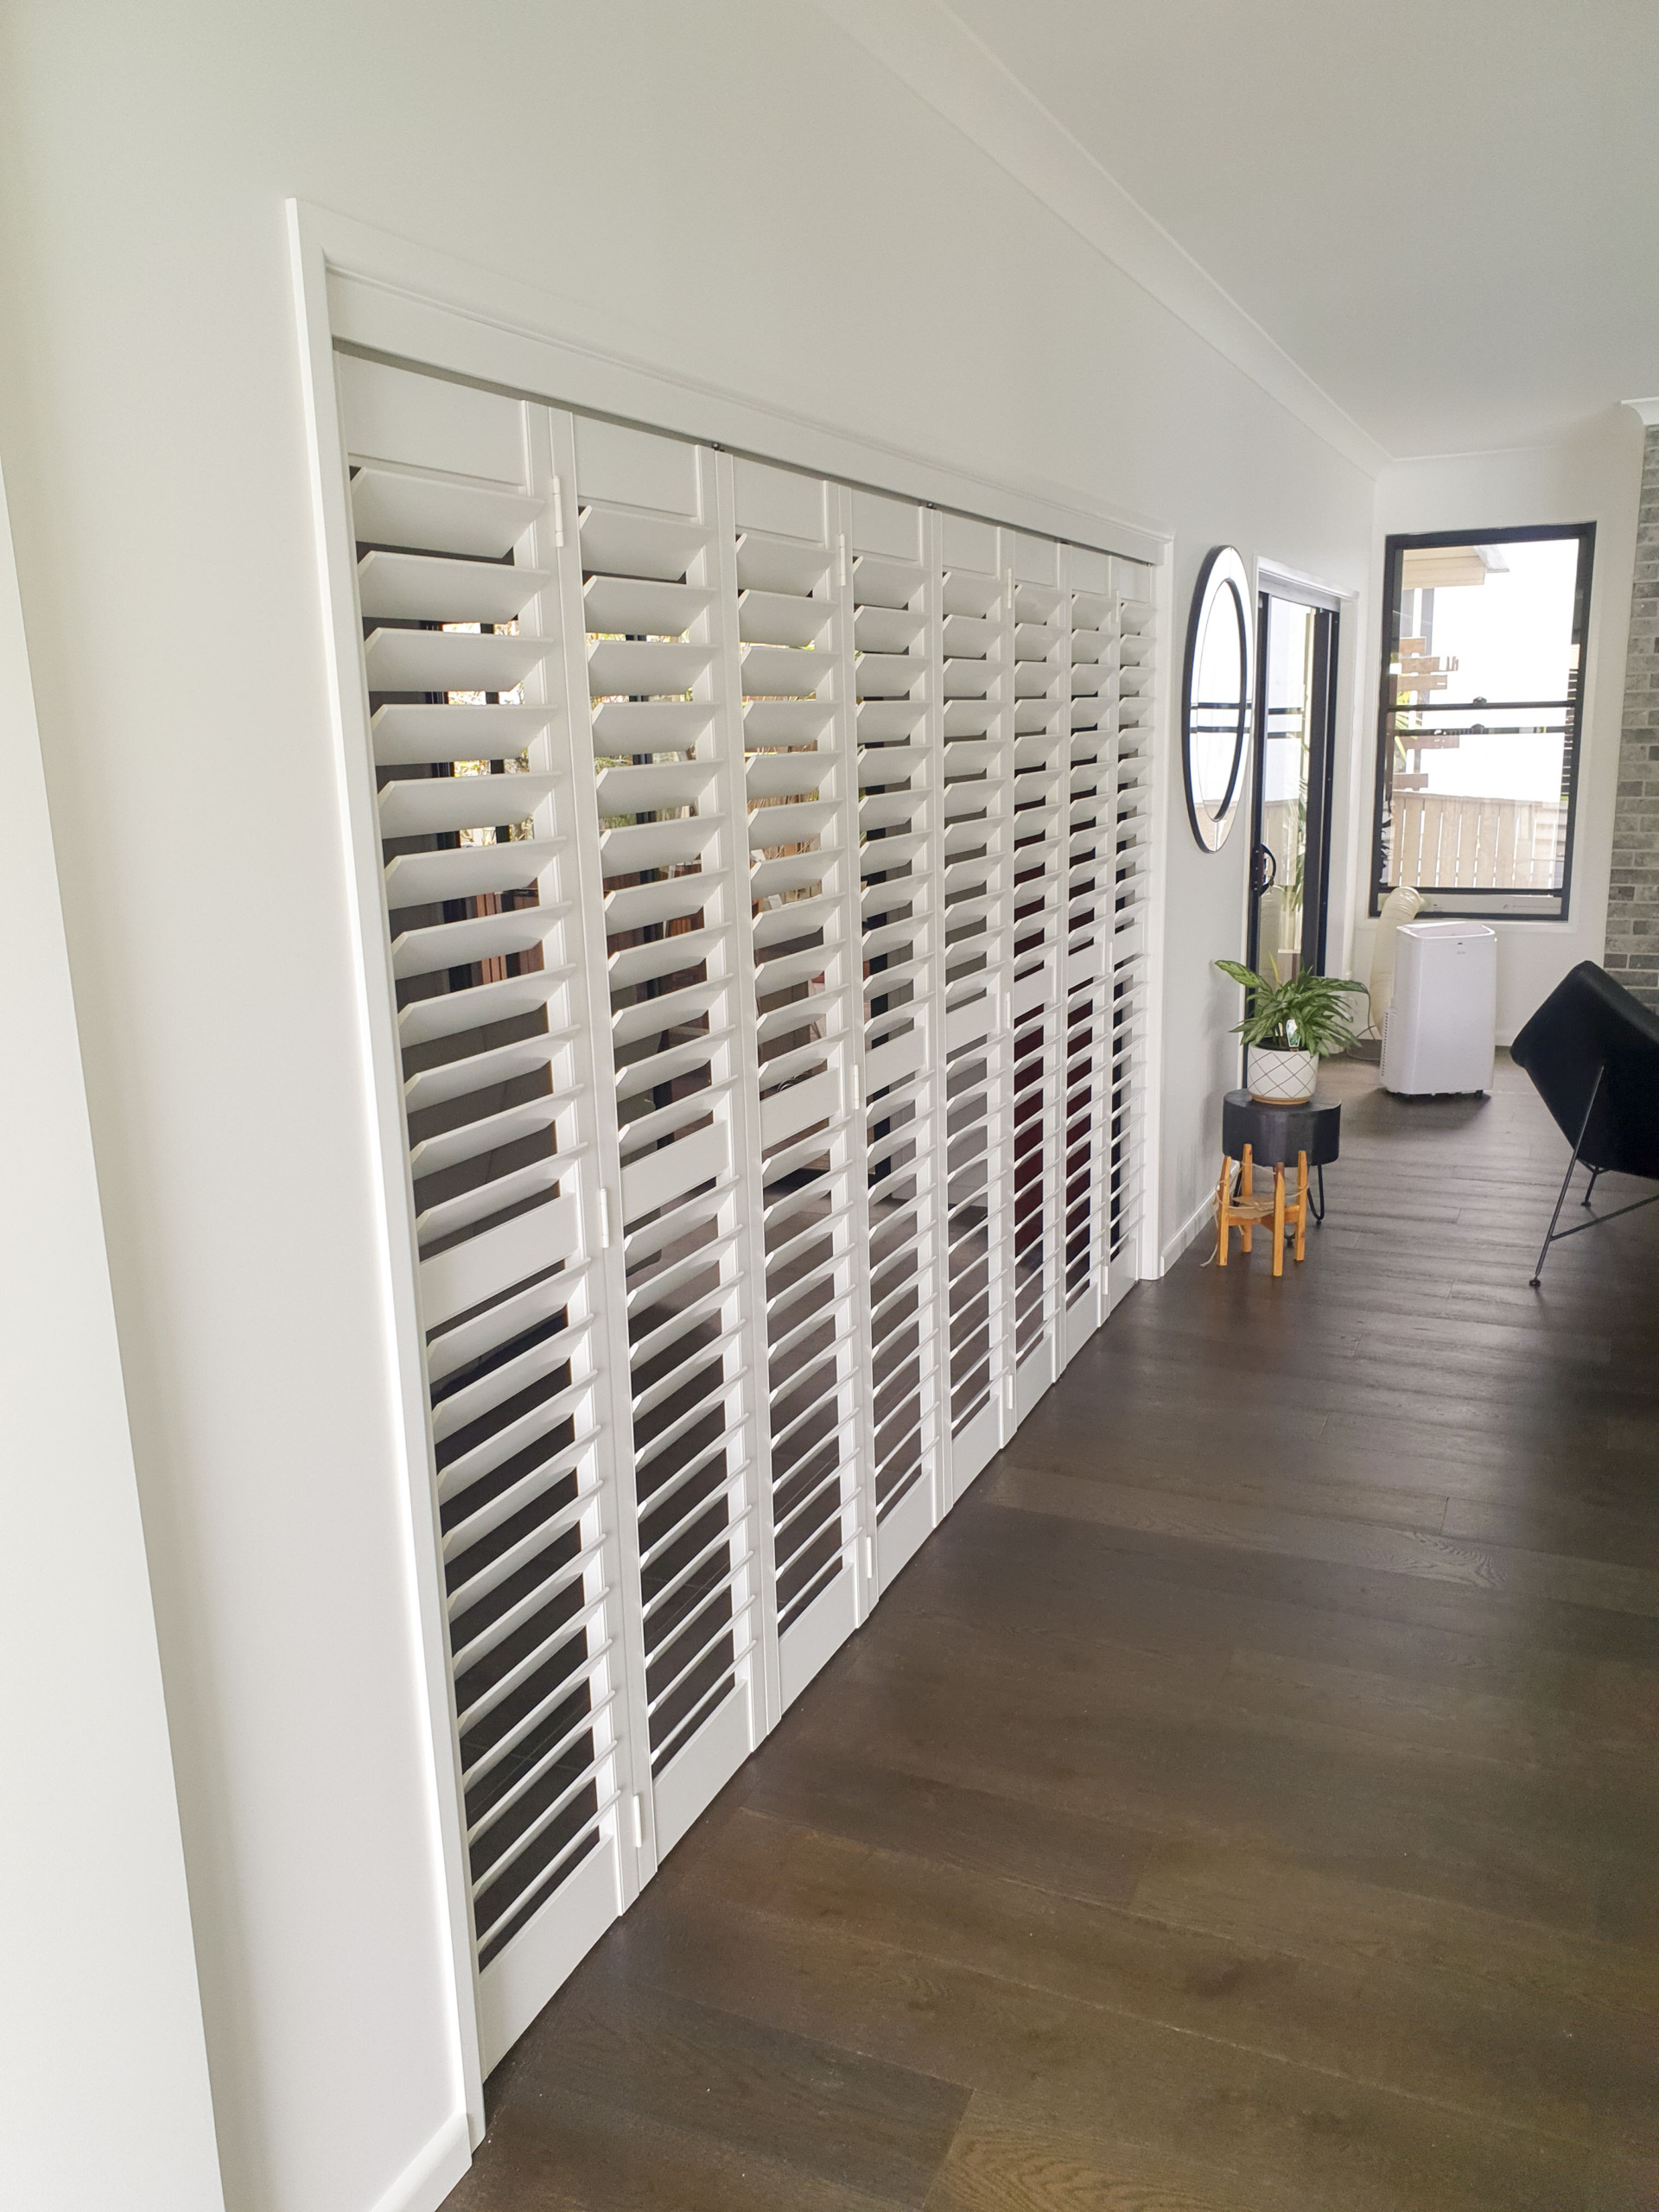 decor blinds thermalite shutters south east queensland